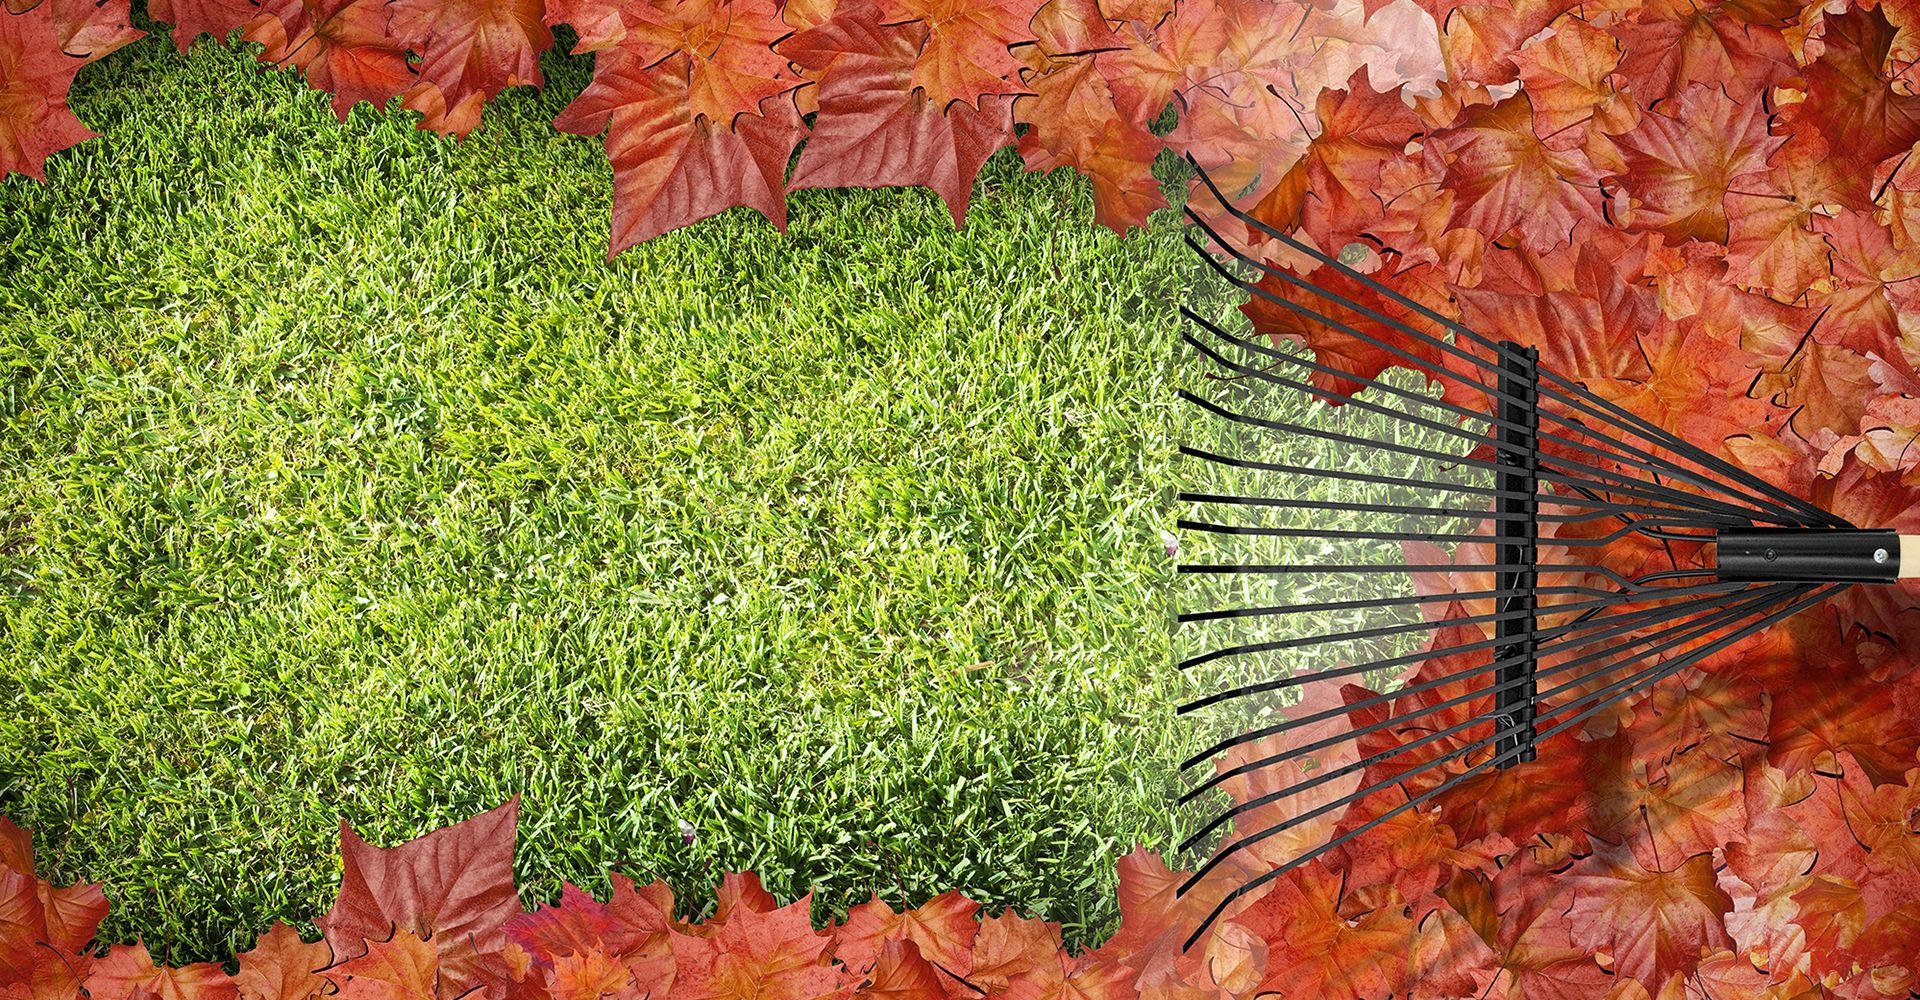 Image of green grass being revealed by a rake removing fall leaves